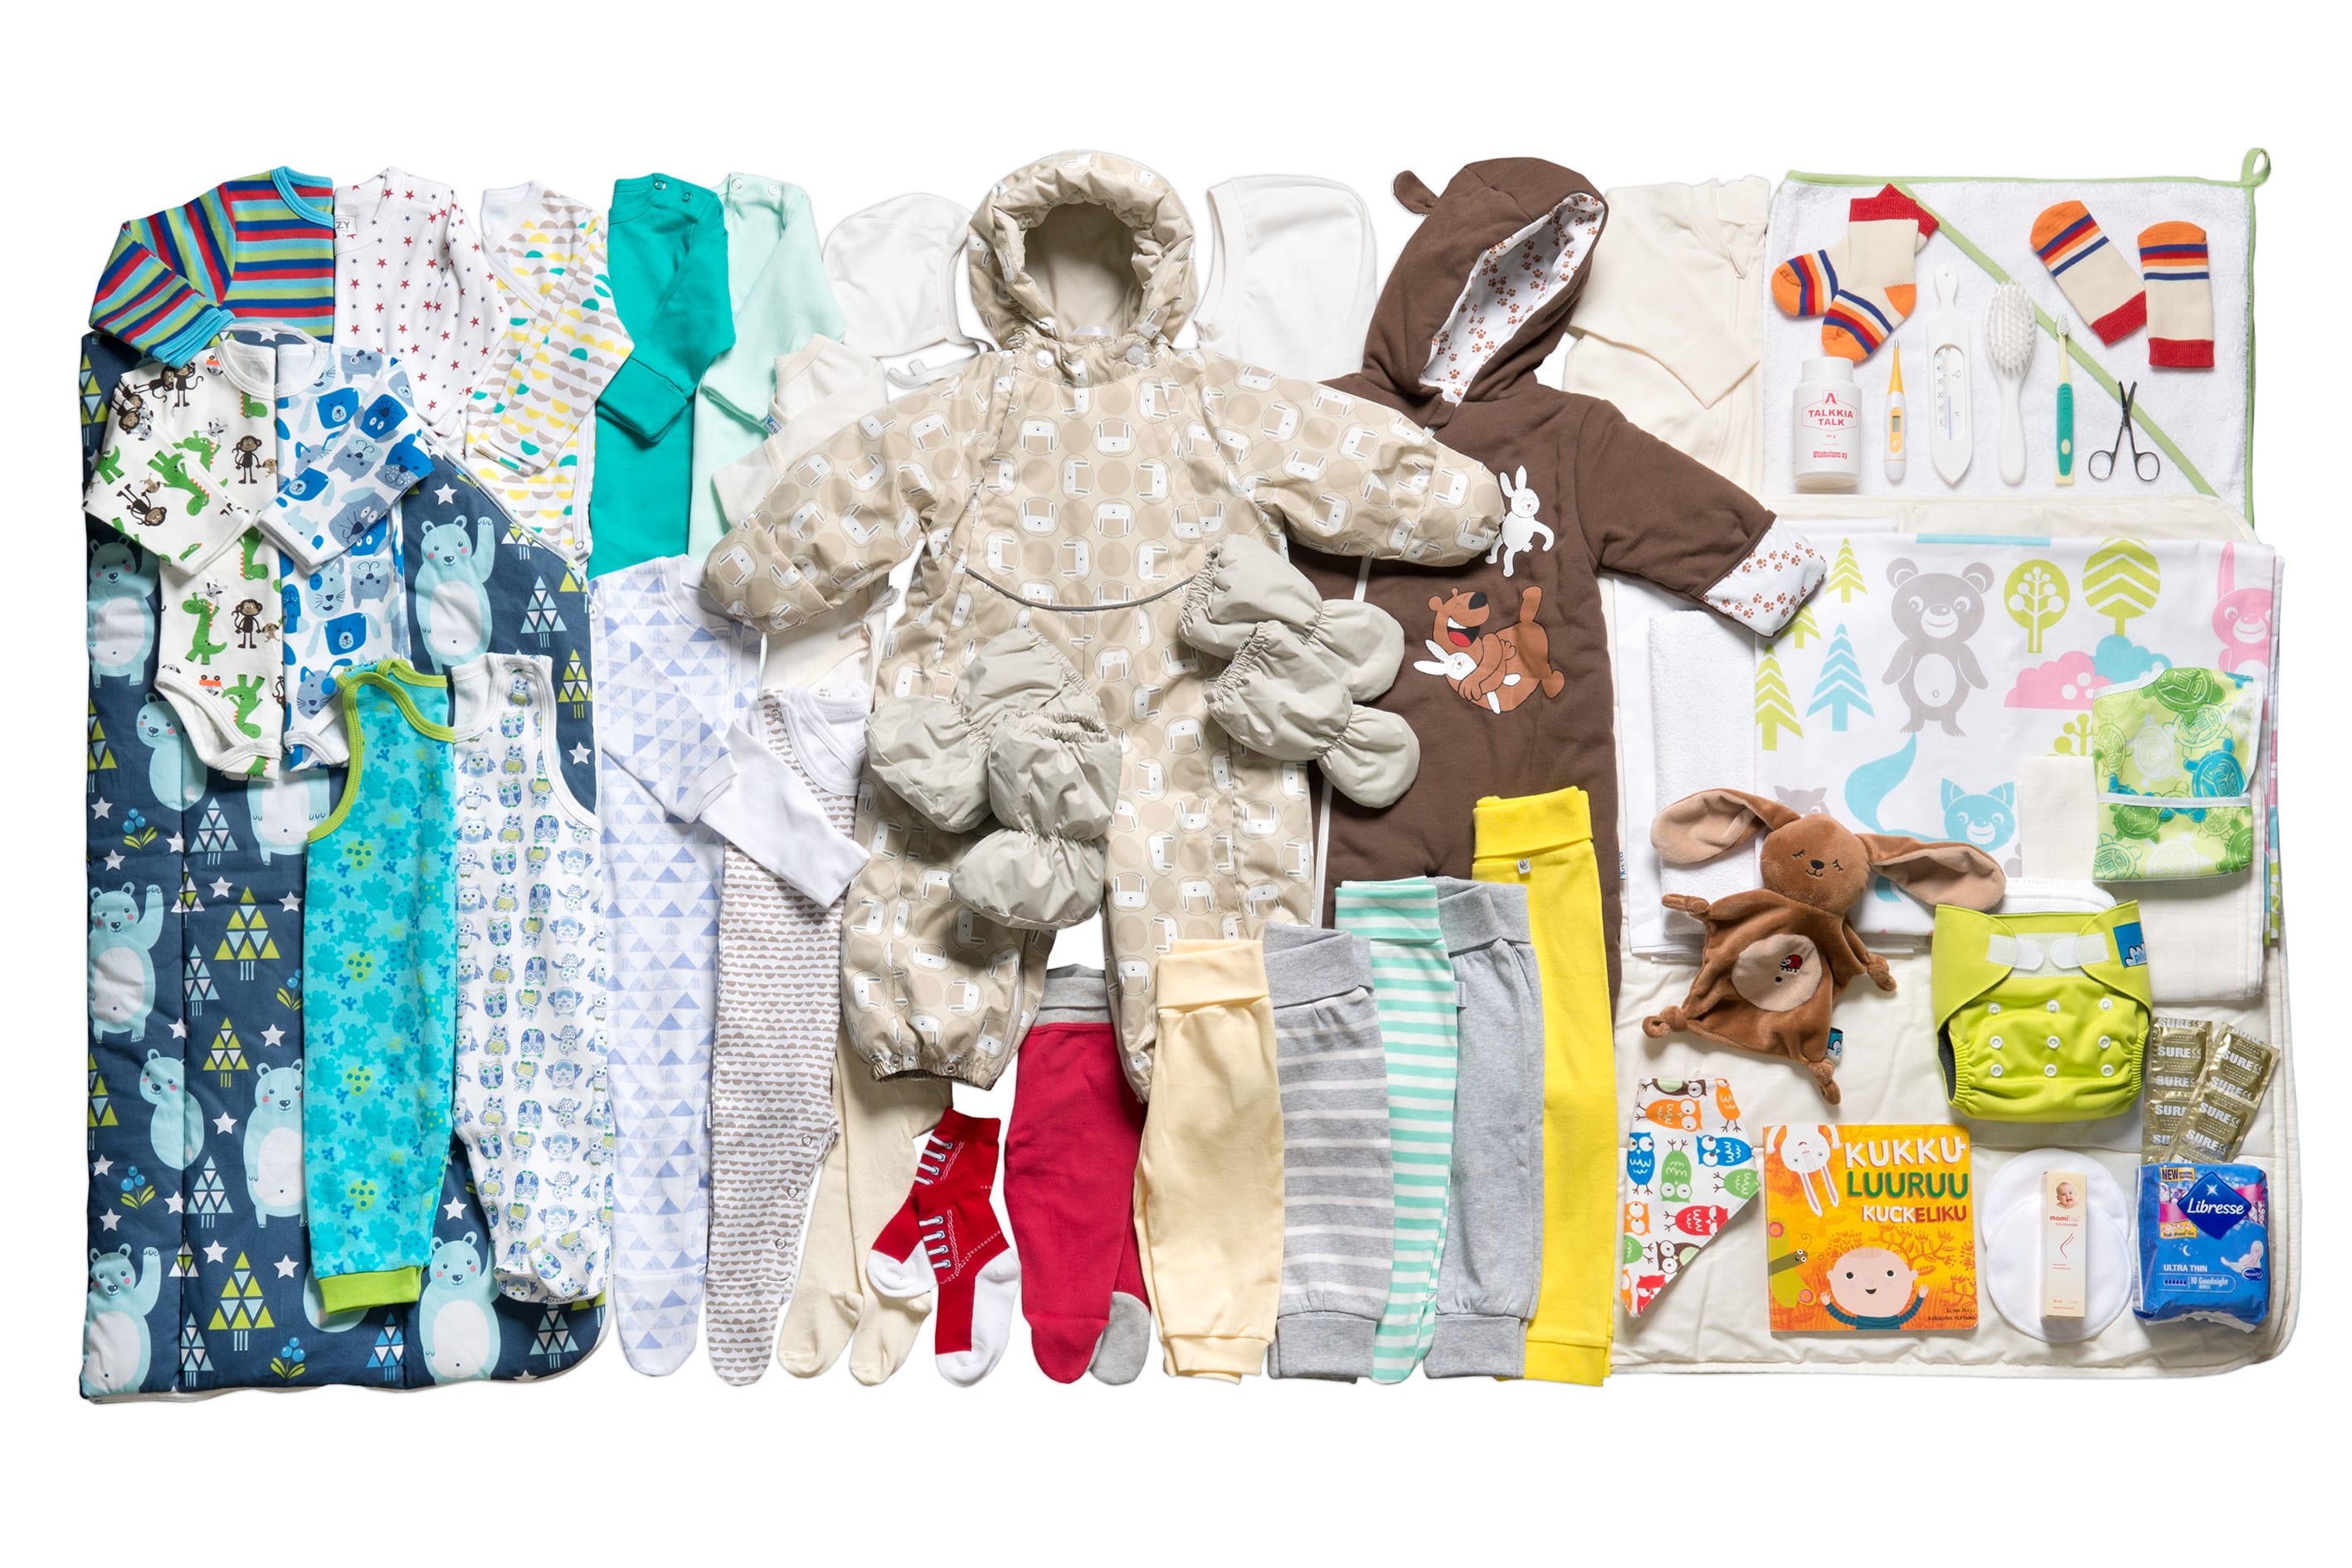 Example of the items included in the Finnish maternity package, including baby clothing, toys, nappies, a children's book, and more